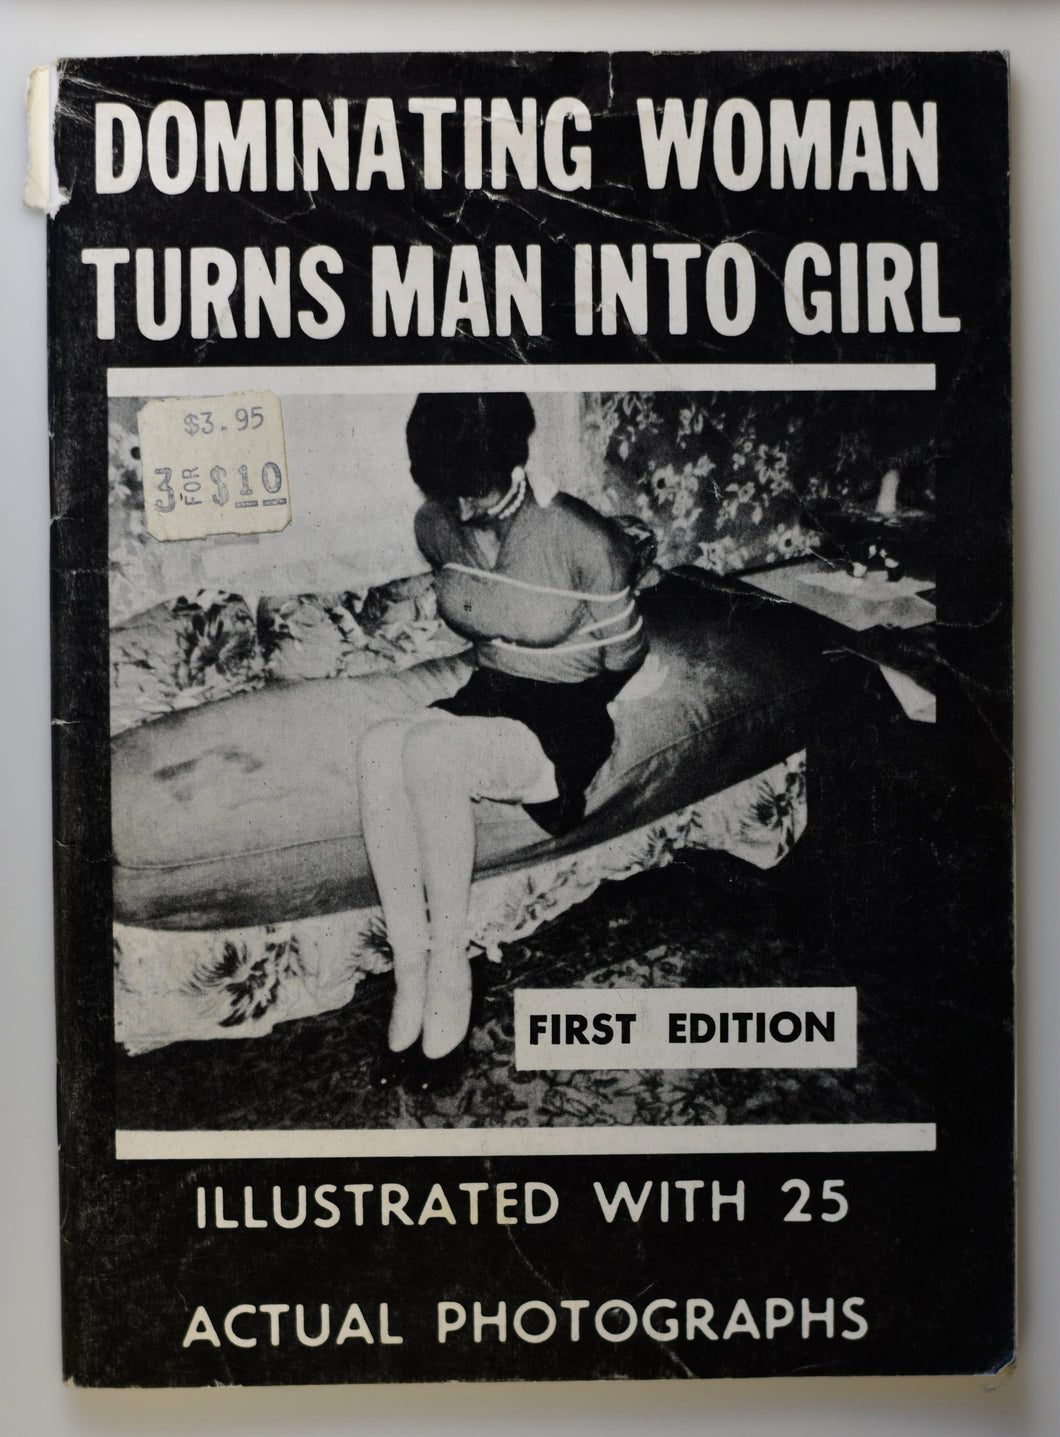 DOMINATING WOMAN TURNS MAN INTO GIRL FIRST EDITION COVER